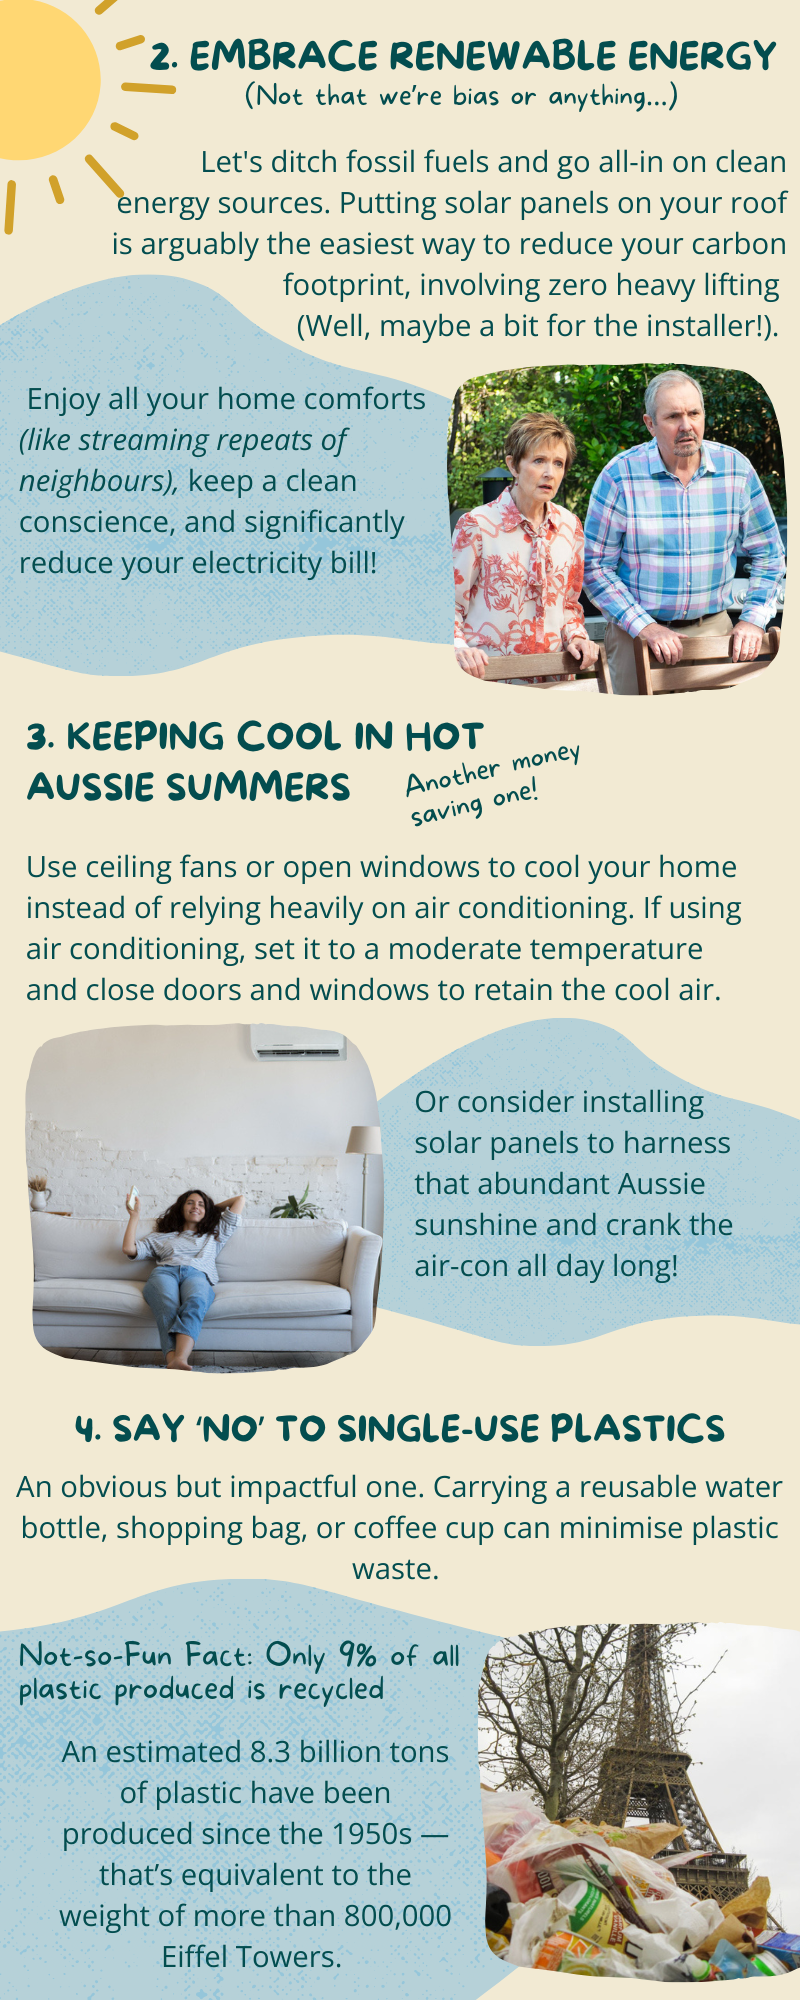 infographic with detailed tips to be eco-friendly without compromising everyday comfort